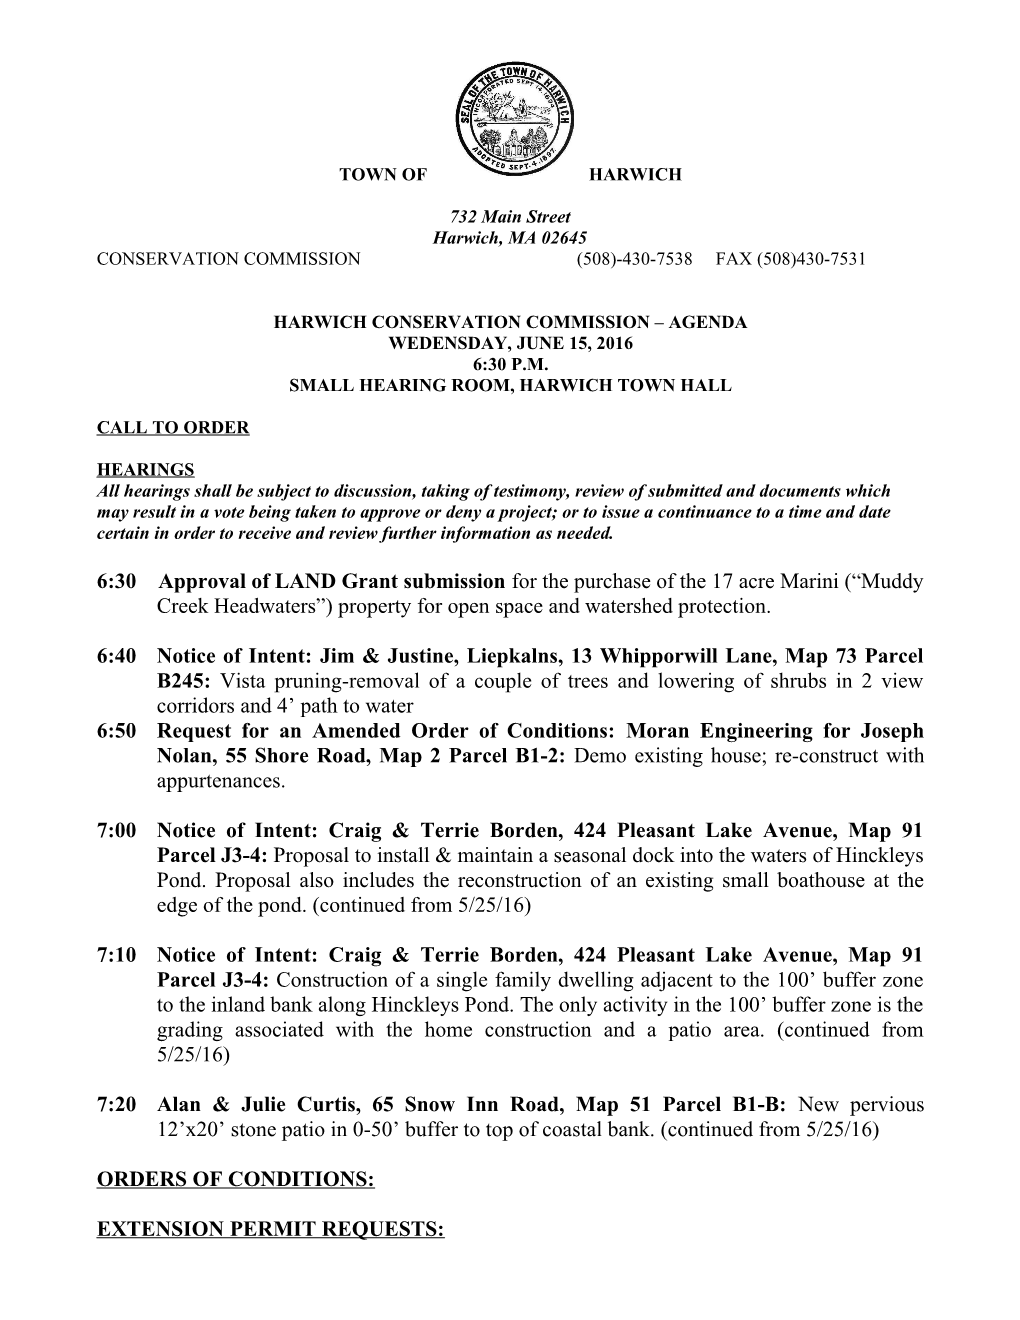 Harwich Conservation Commission Agenda